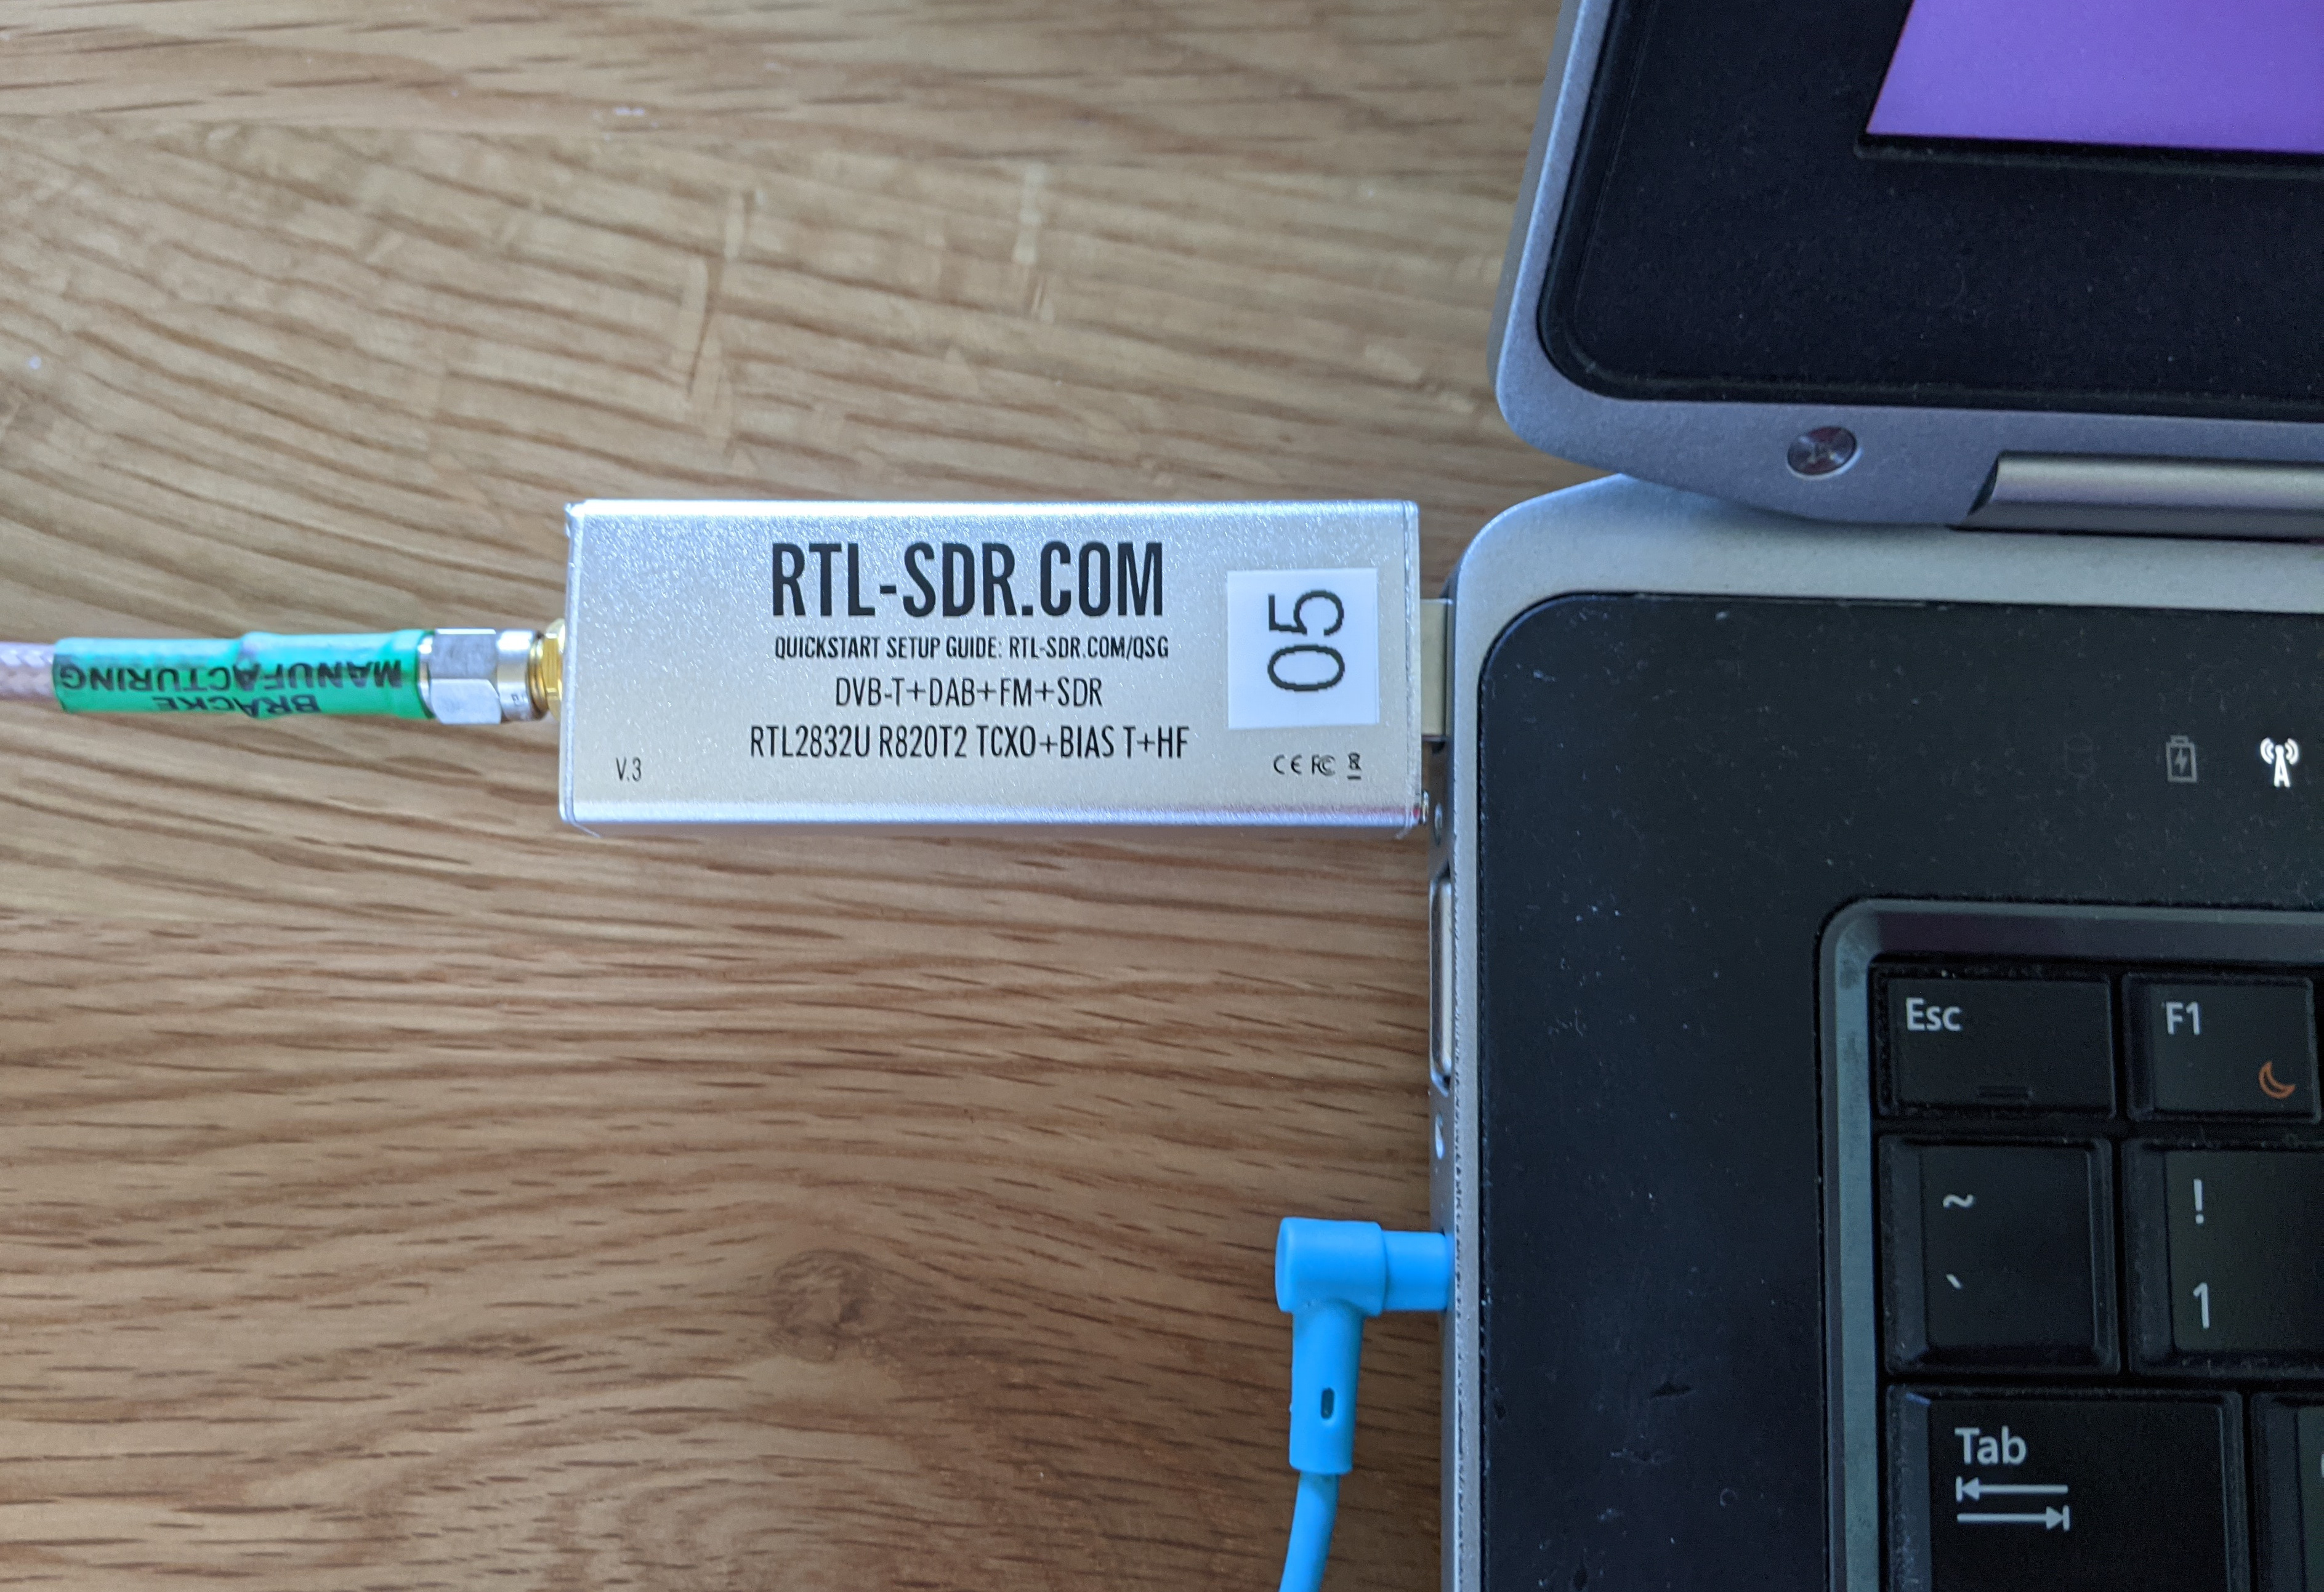 AIS Decoding with an RTL-SDR Blog v3 Dongle